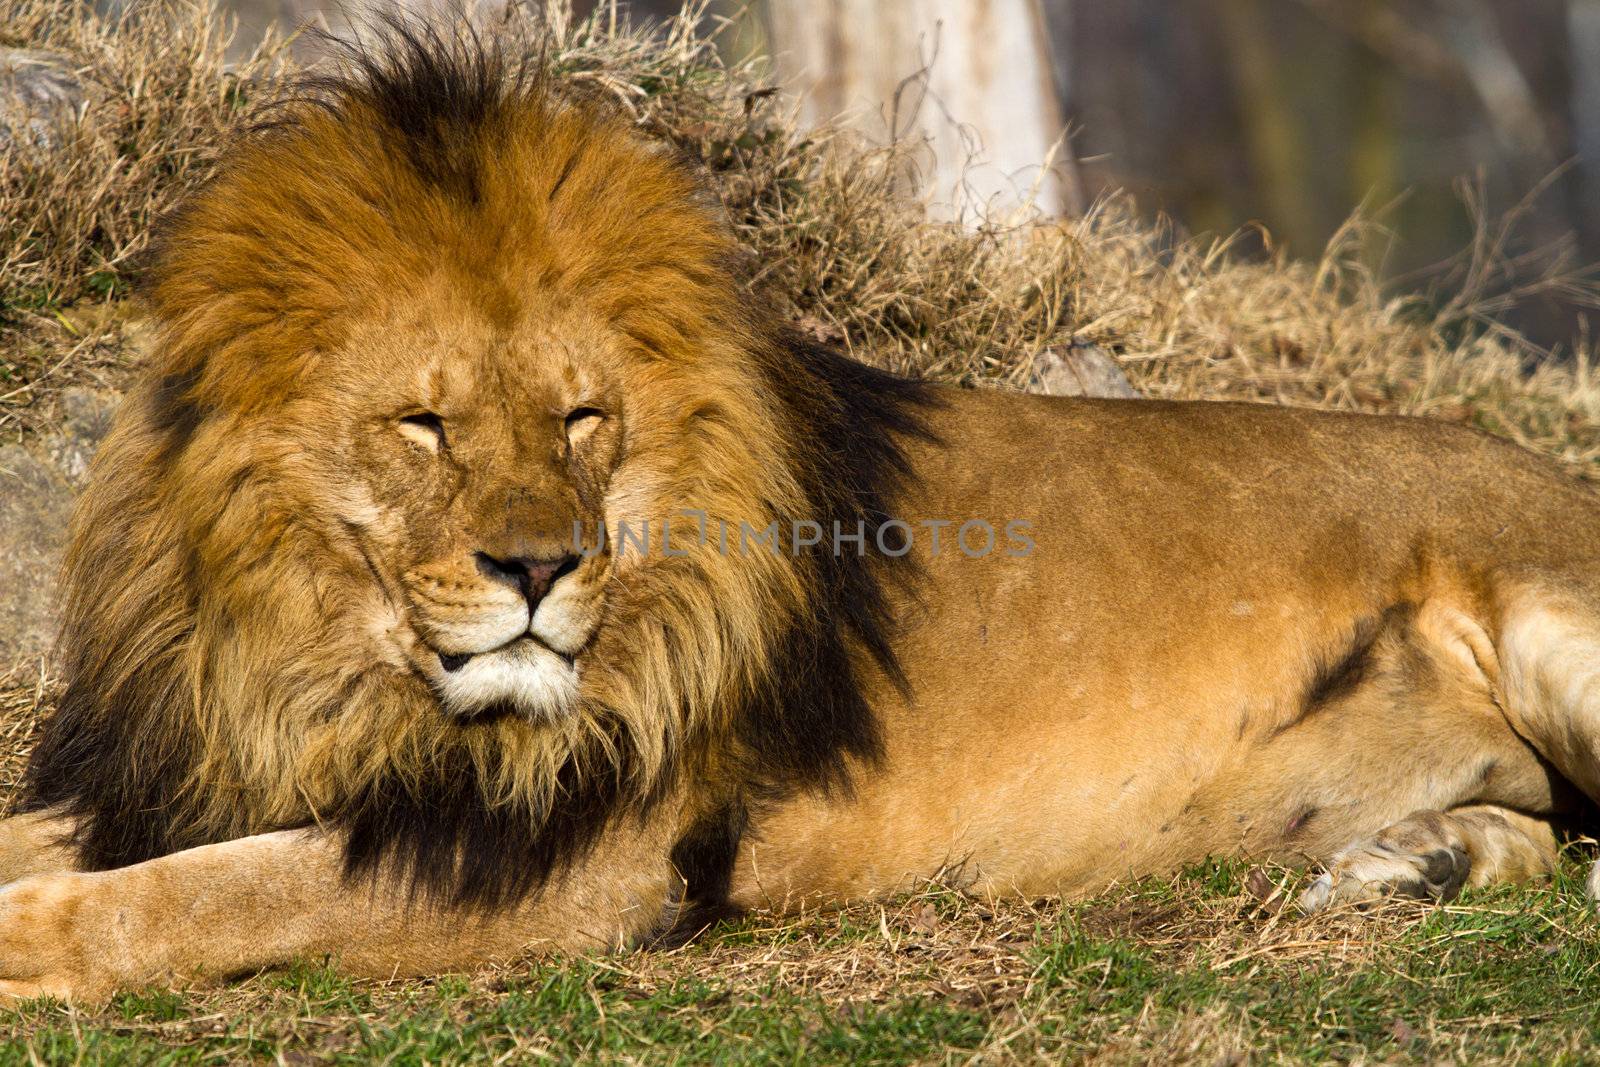 Lion the king by lsantilli